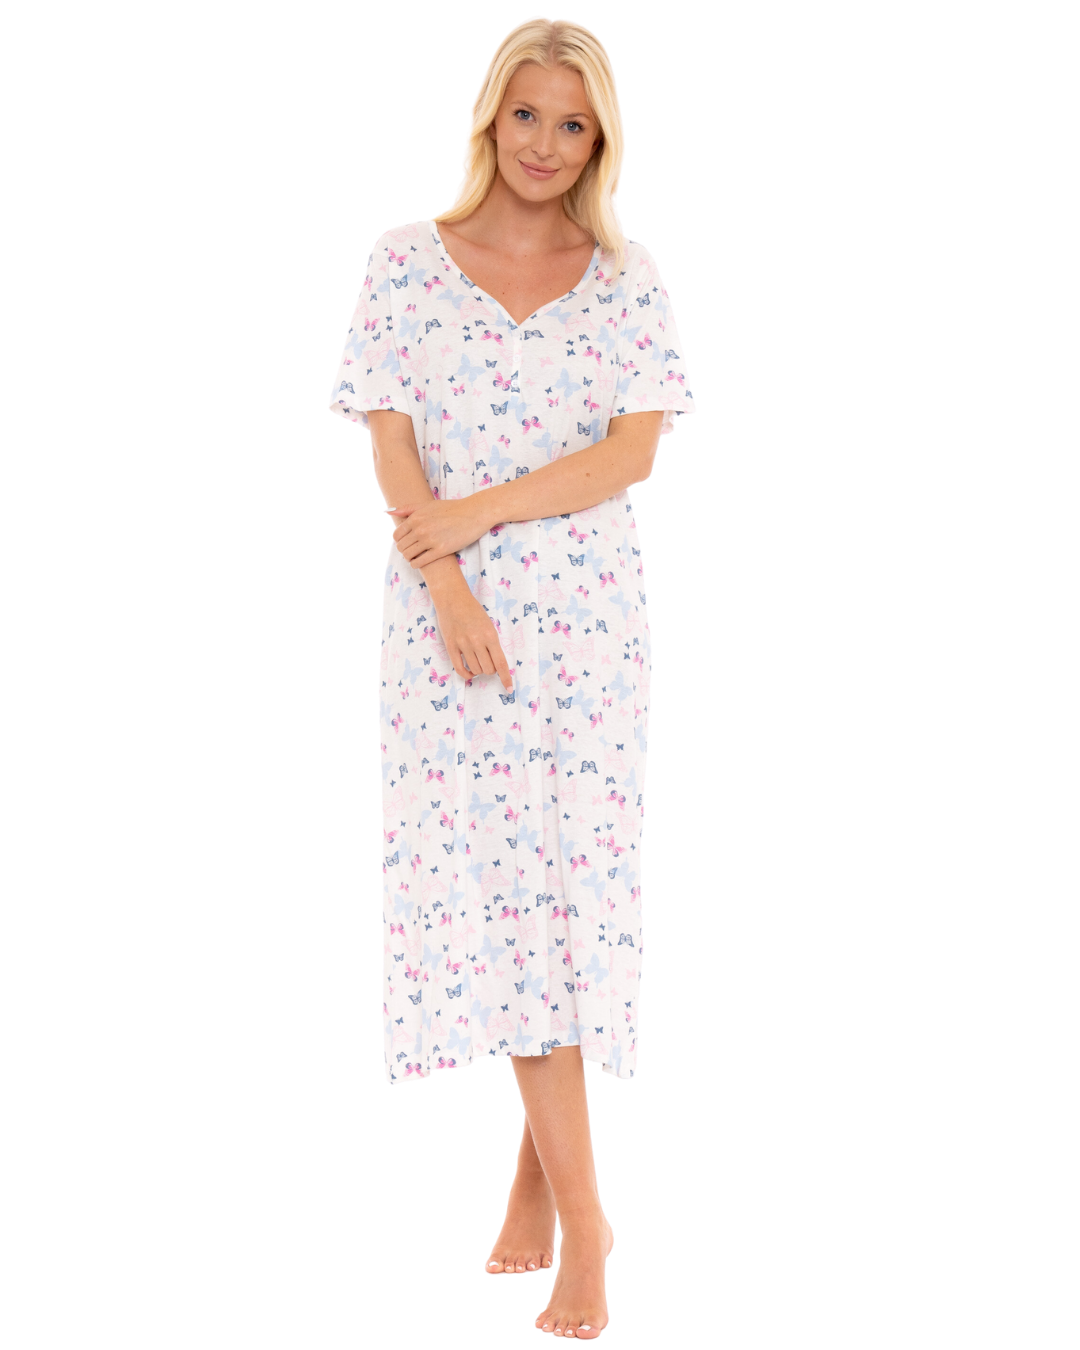 Lilac Butterfly 100% Cotton Plus Size Nightdress